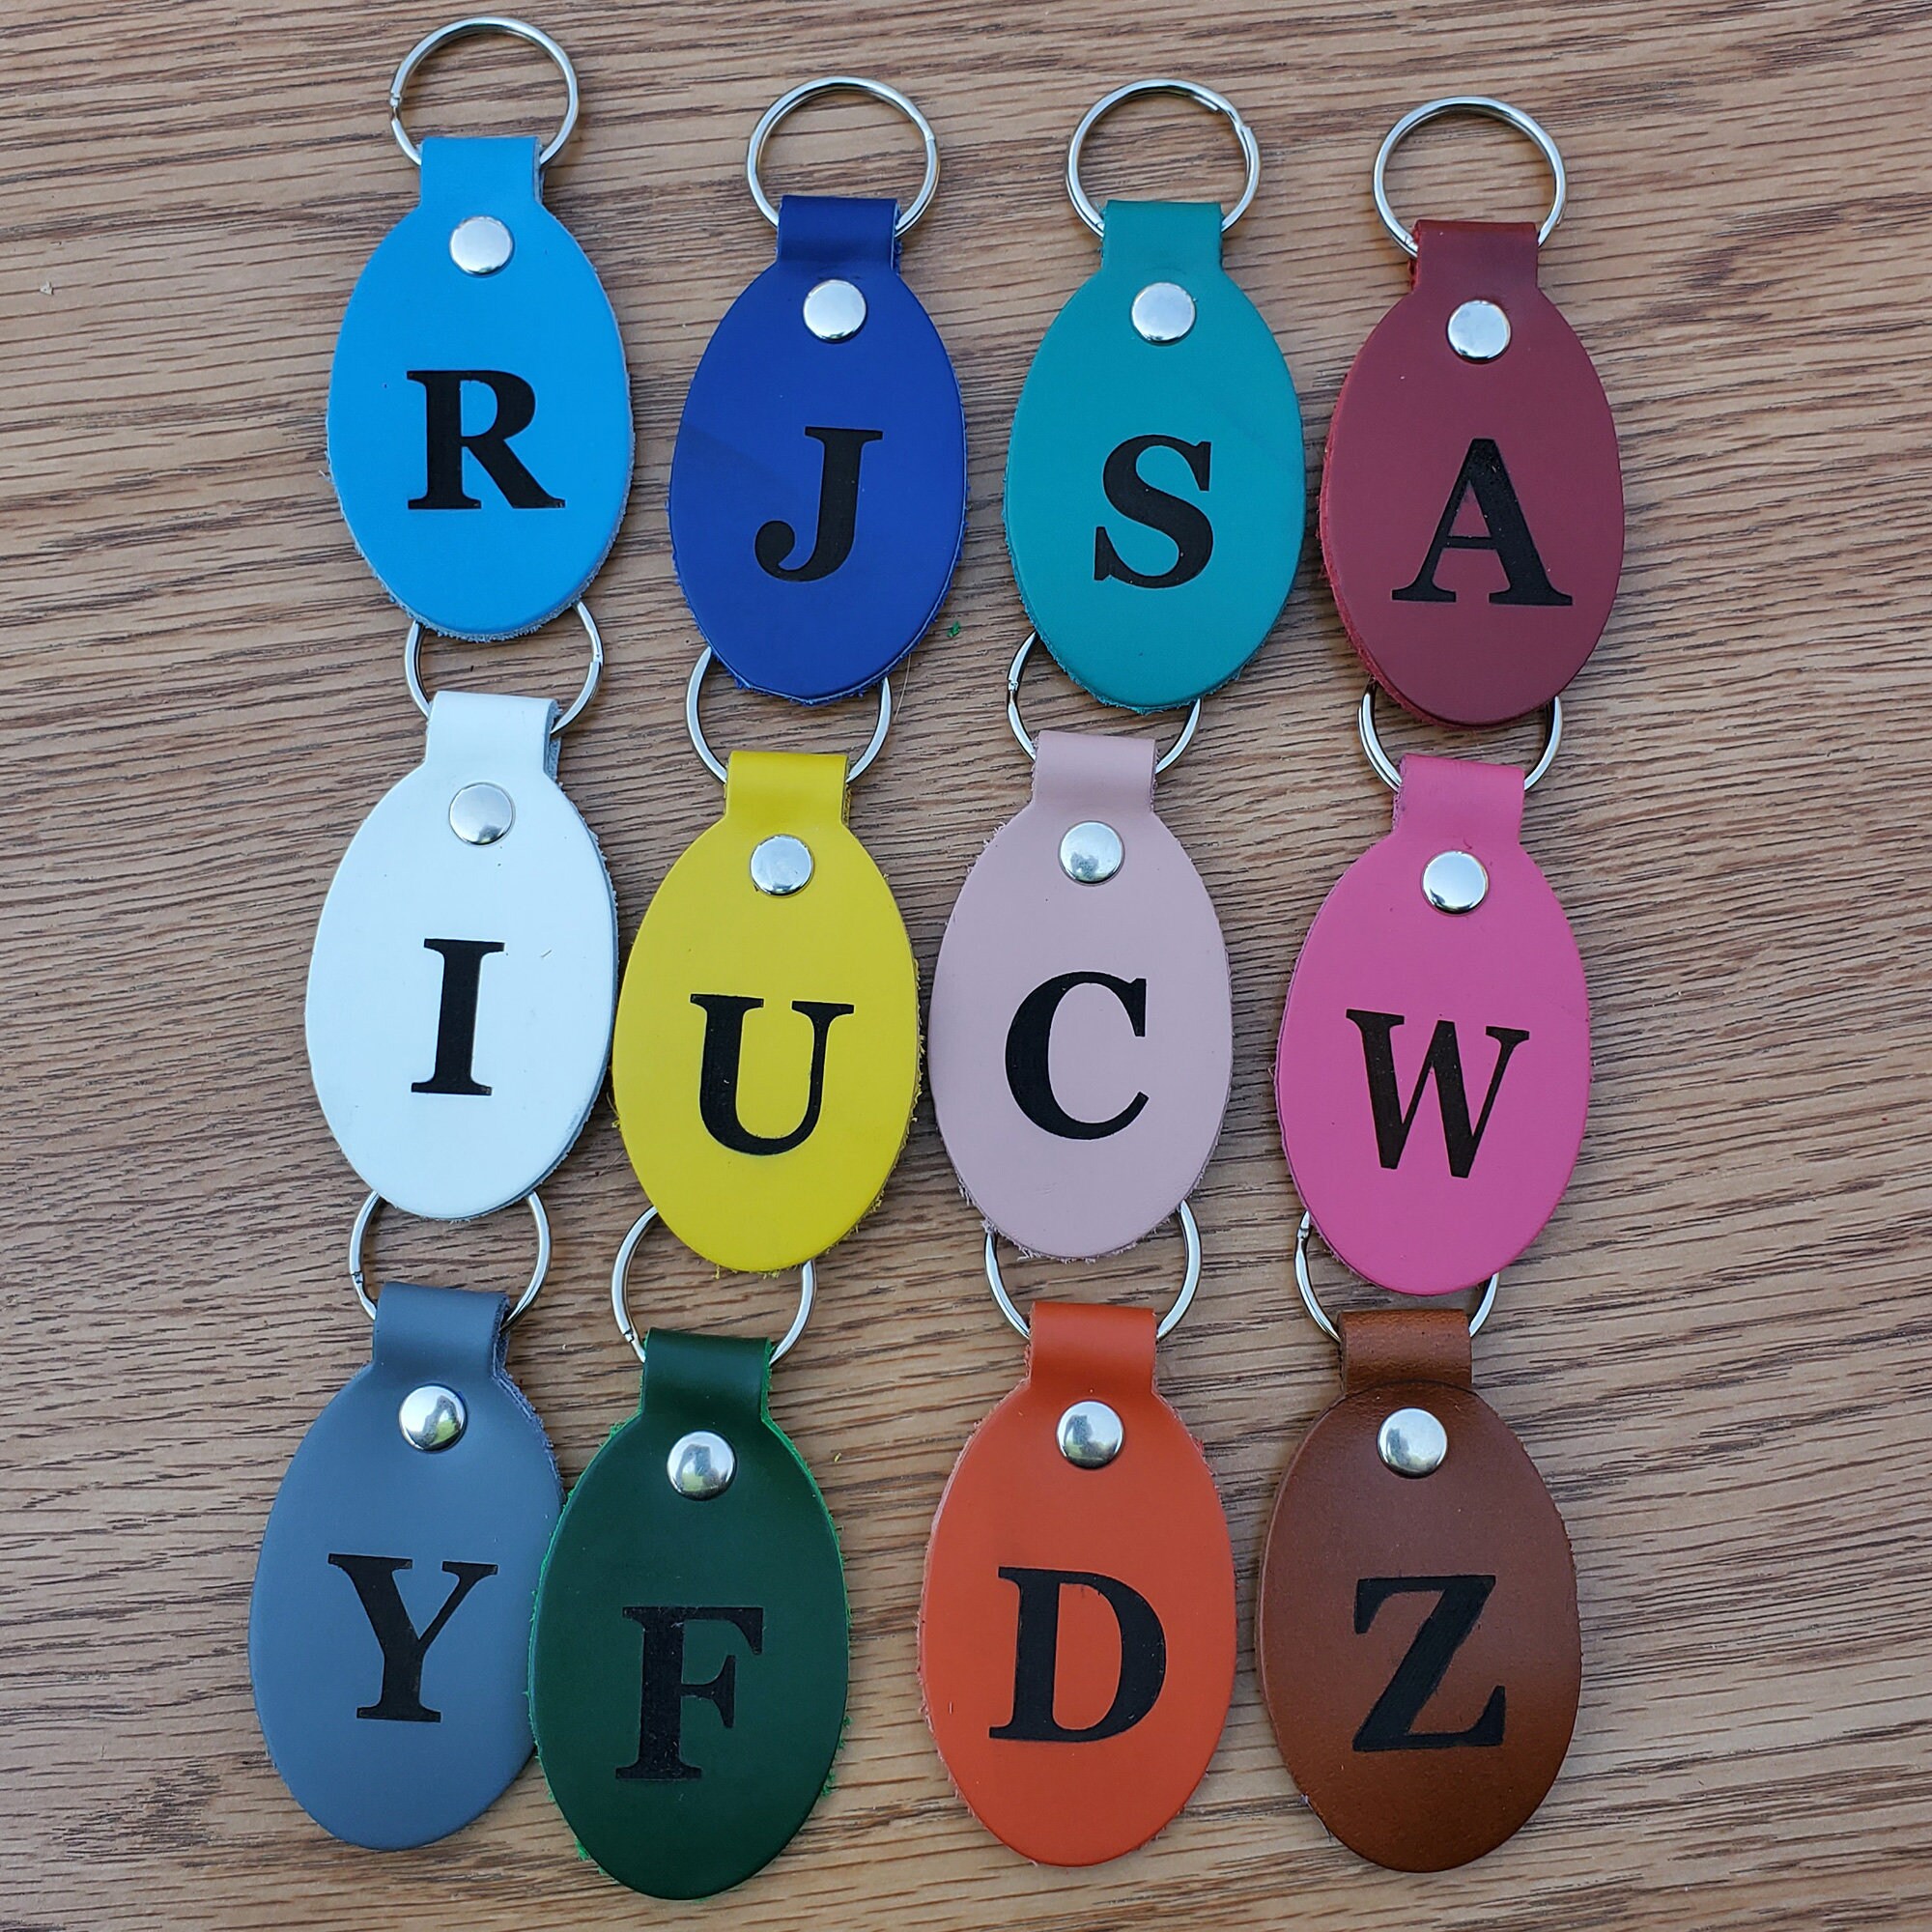 10 Pack Leather Keychains Blank - 3/4 Inch Engraving Ready - Hardware  Included